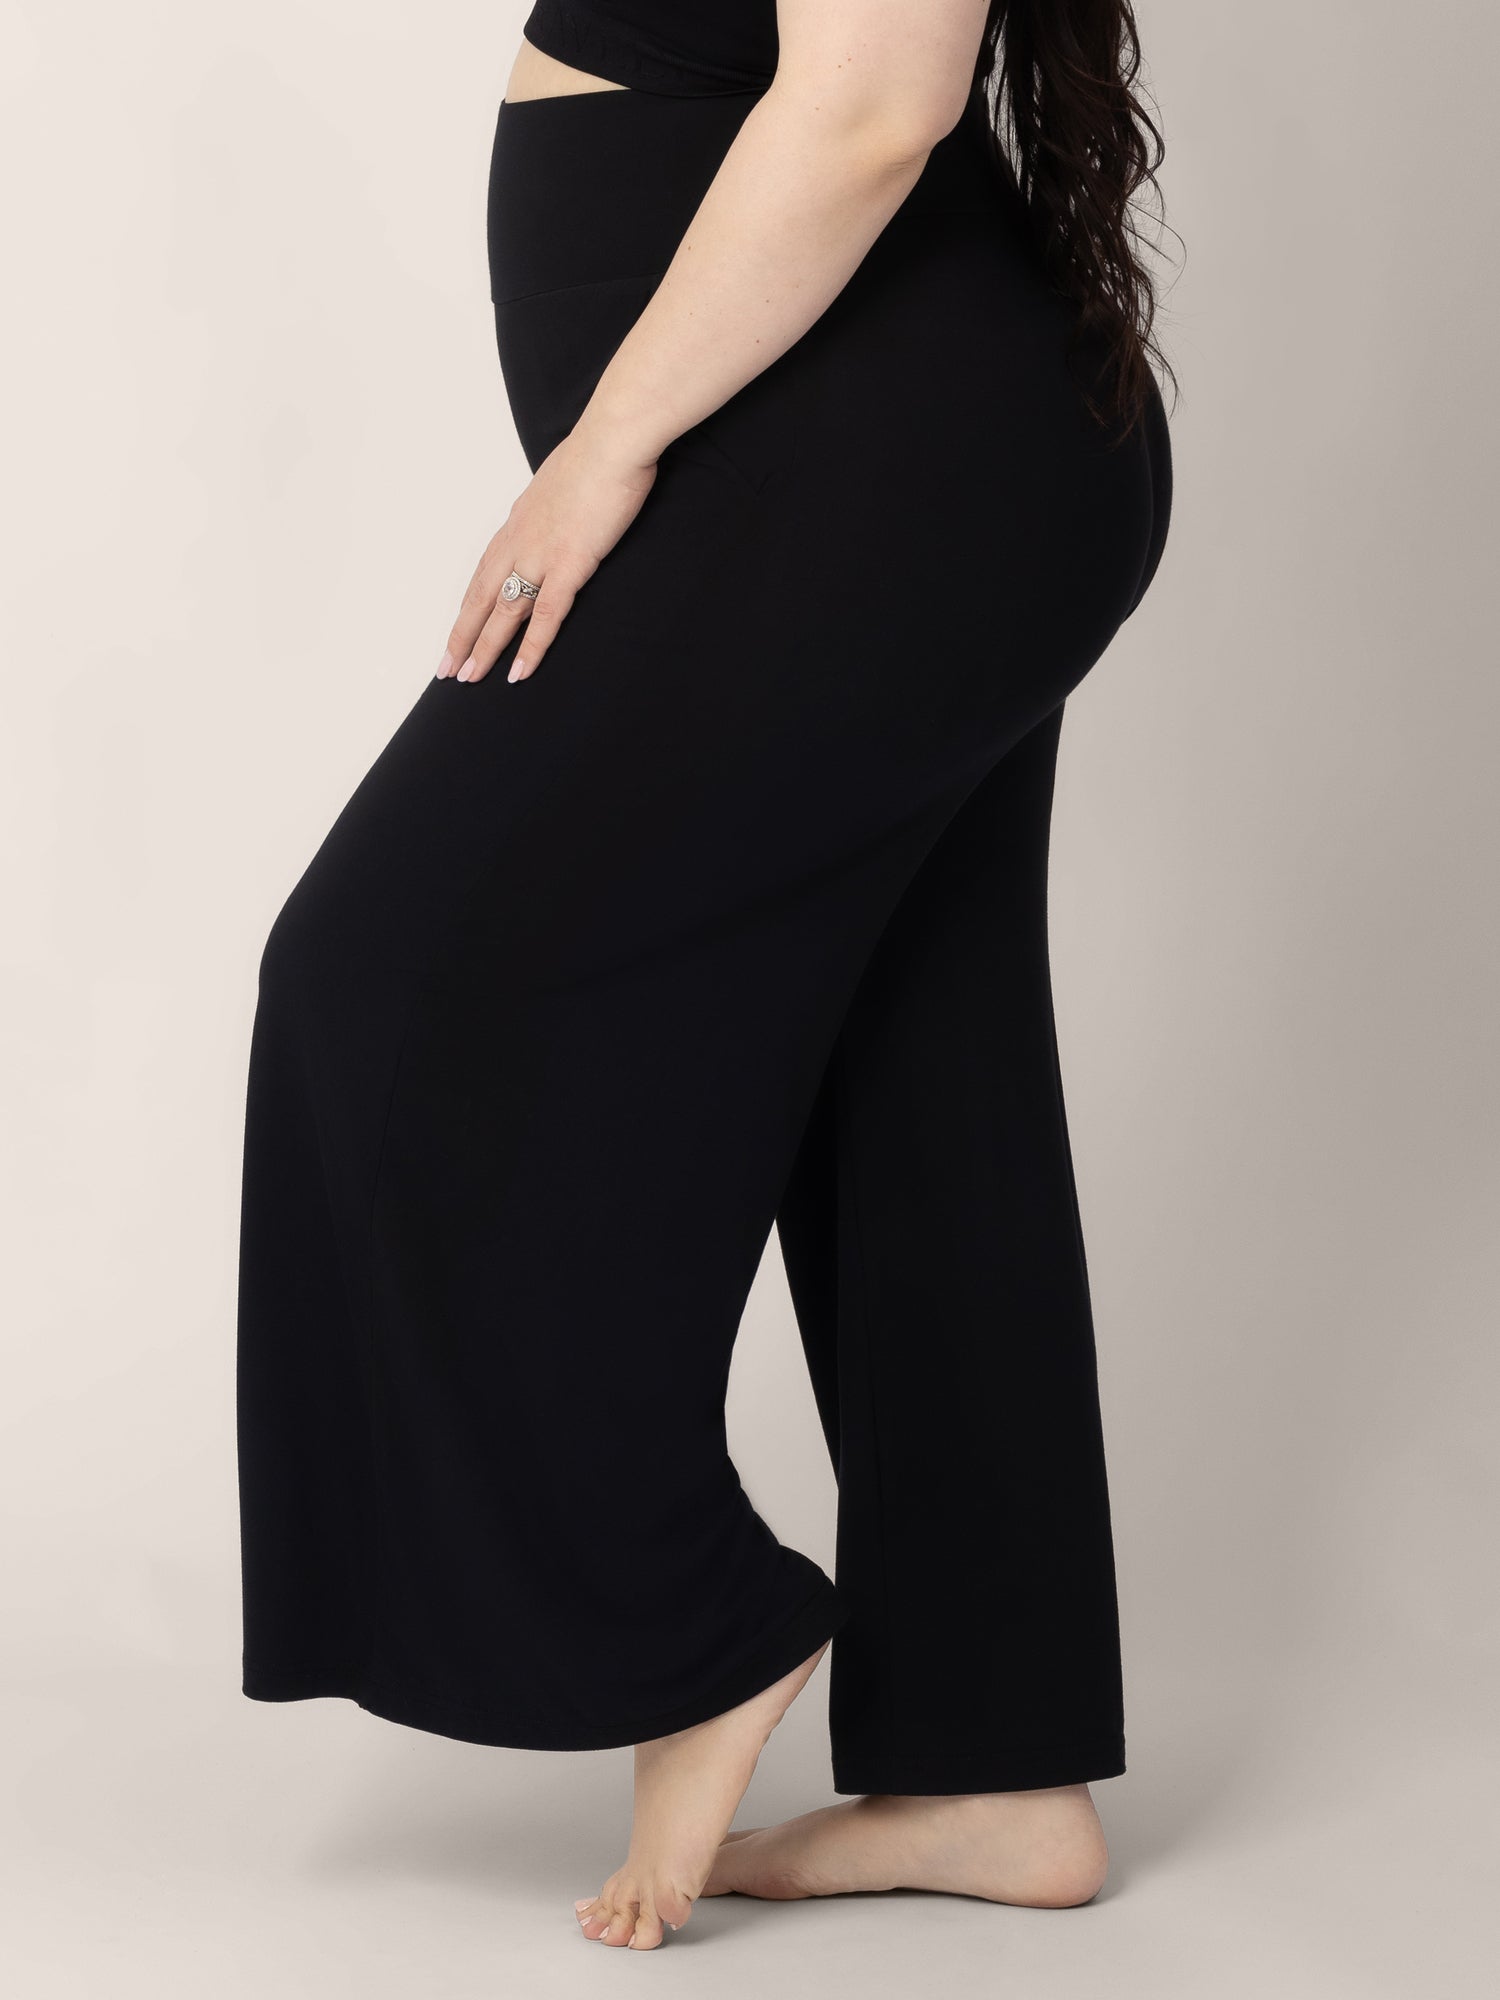 Bottom half of a pregnant model wearing the Bamboo Wide Leg Maternity & Postpartum Lounge Pant in Black